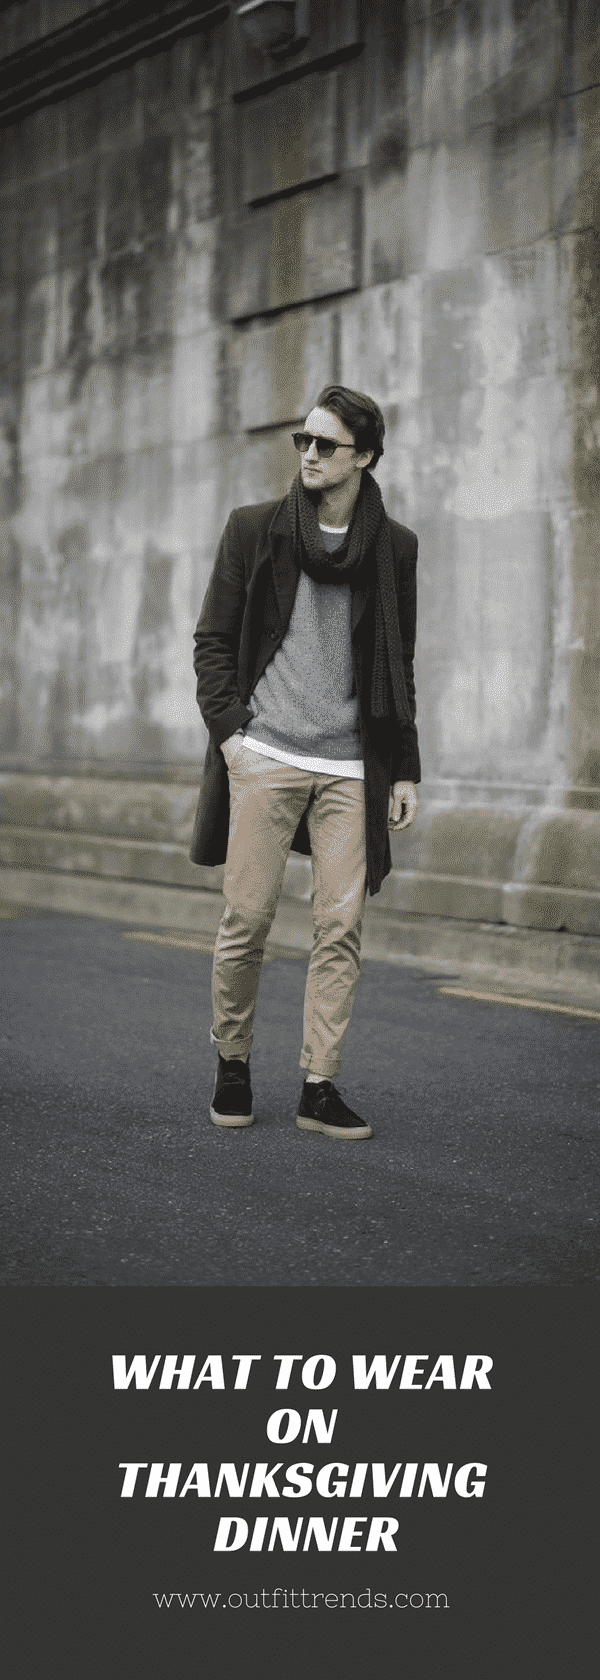 Men's Thanksgiving Outfits- 30 Ways to Dress on Thanksgiving